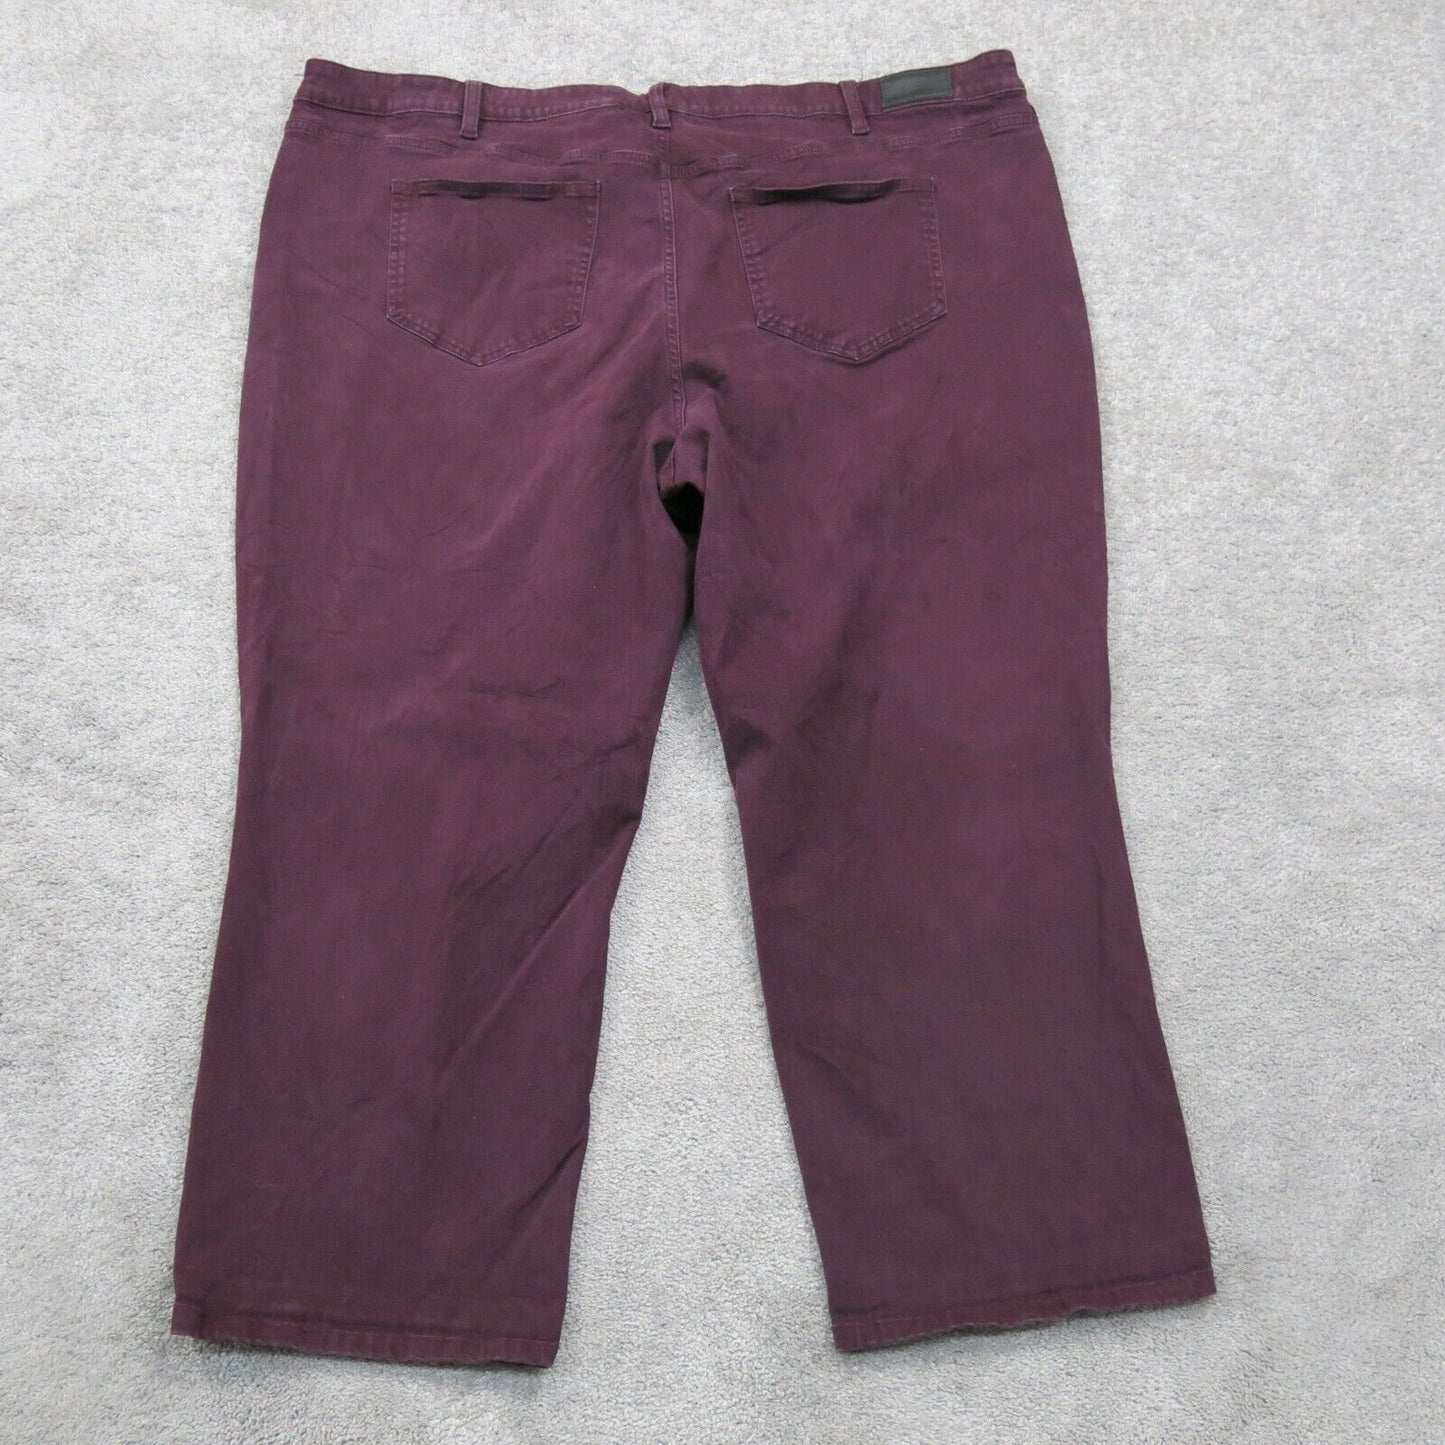 Lands End Women True Straight Leg Jeans Pant Mid Rise Pockets Red Size 26W